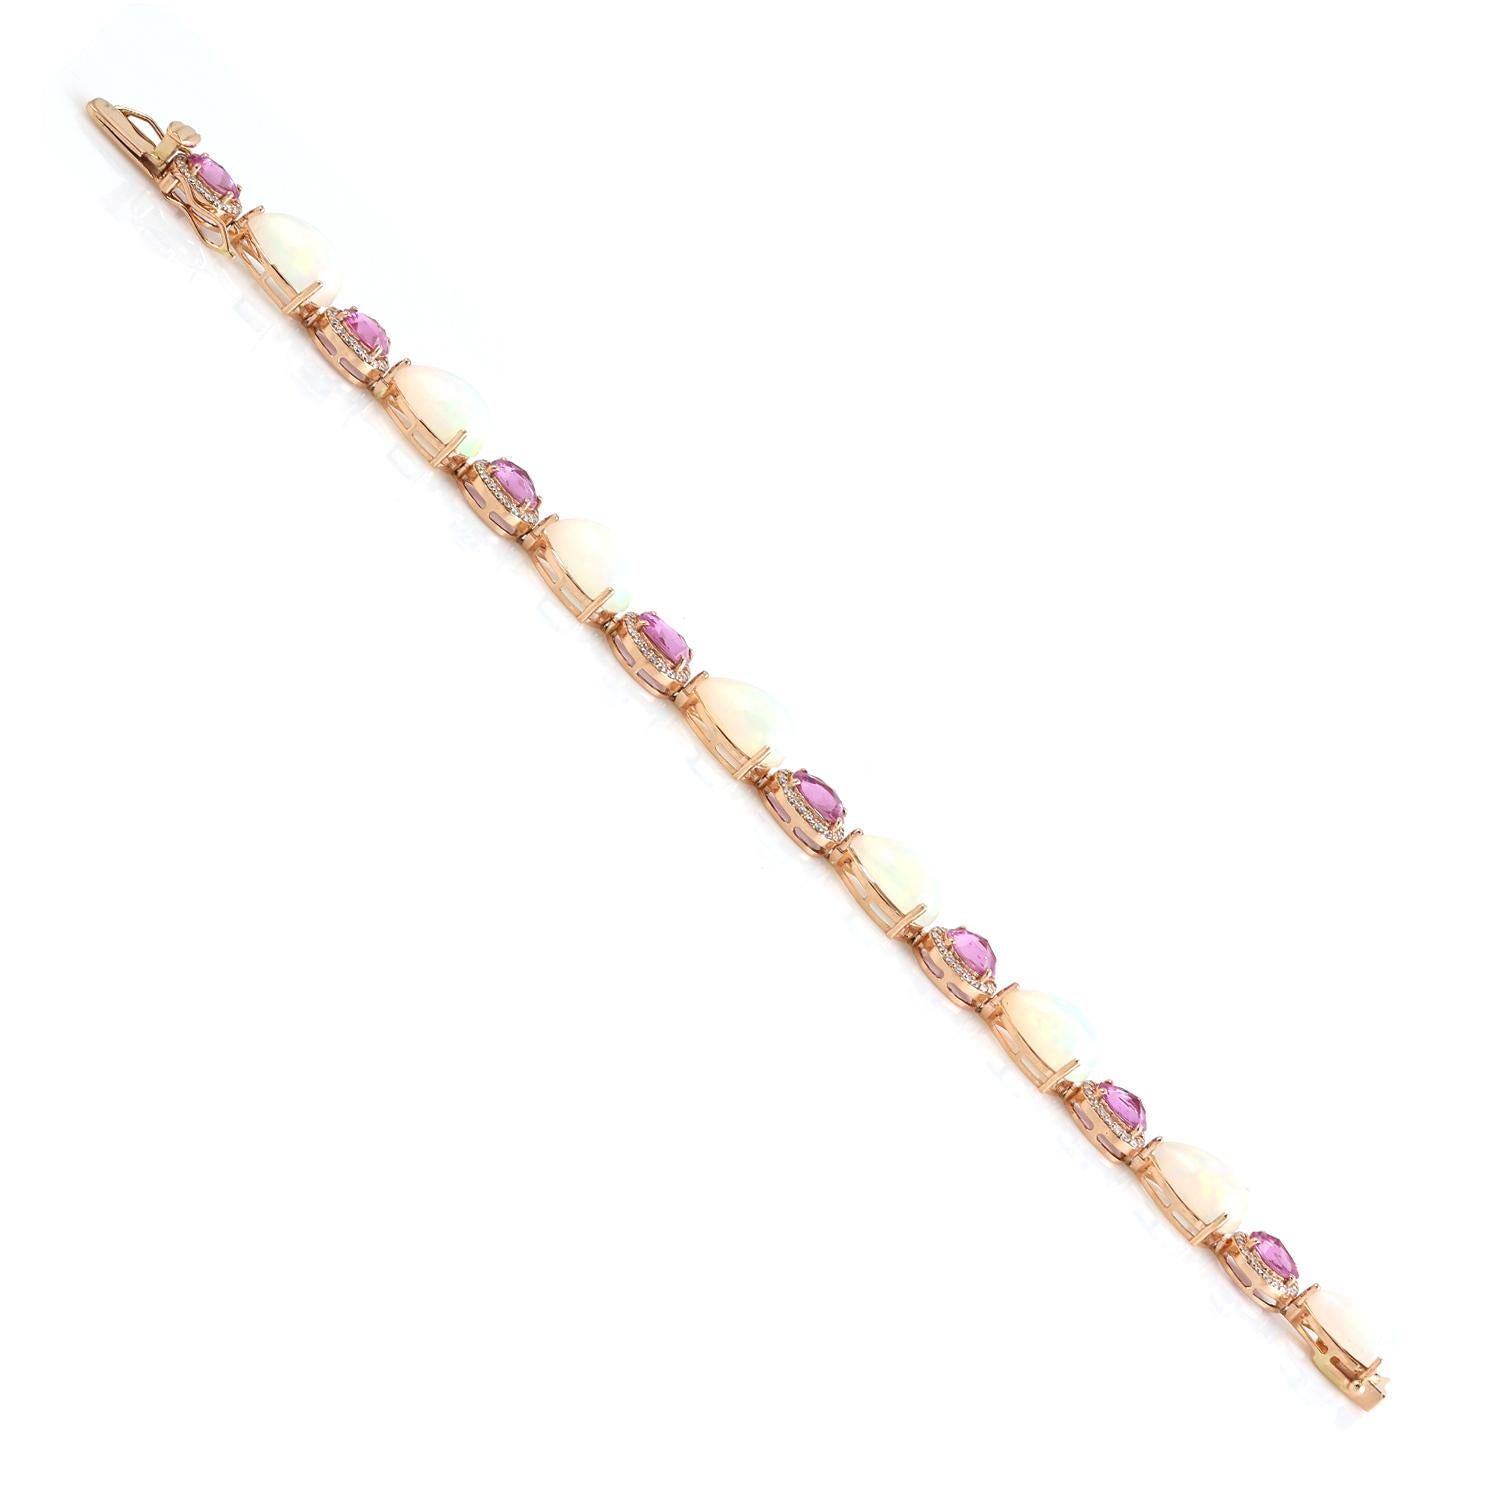 Mixed Cut 17.58ct Opal & Sapphire Bracelet With Diamonds Made In 18k Gold For Sale